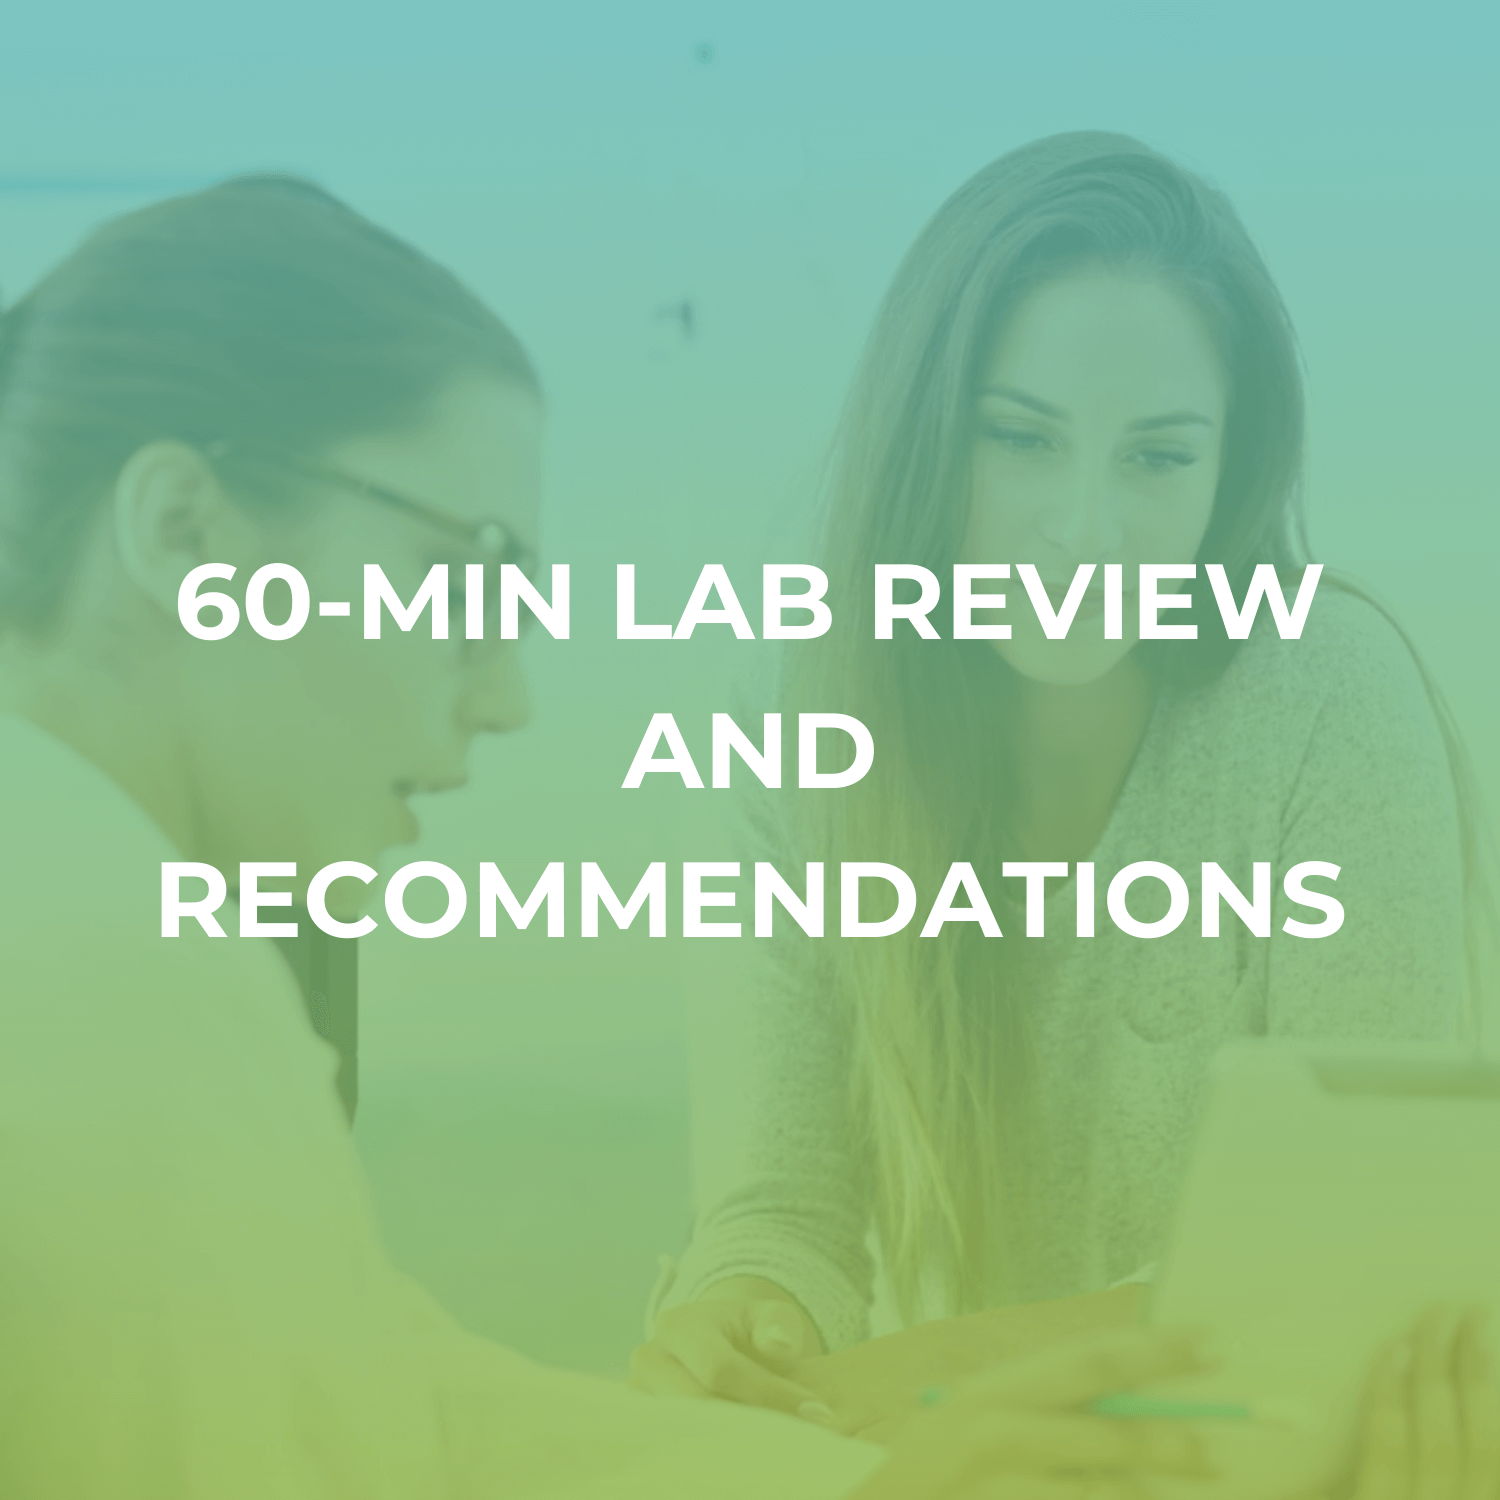 60-Min Lab Review and Recommendations